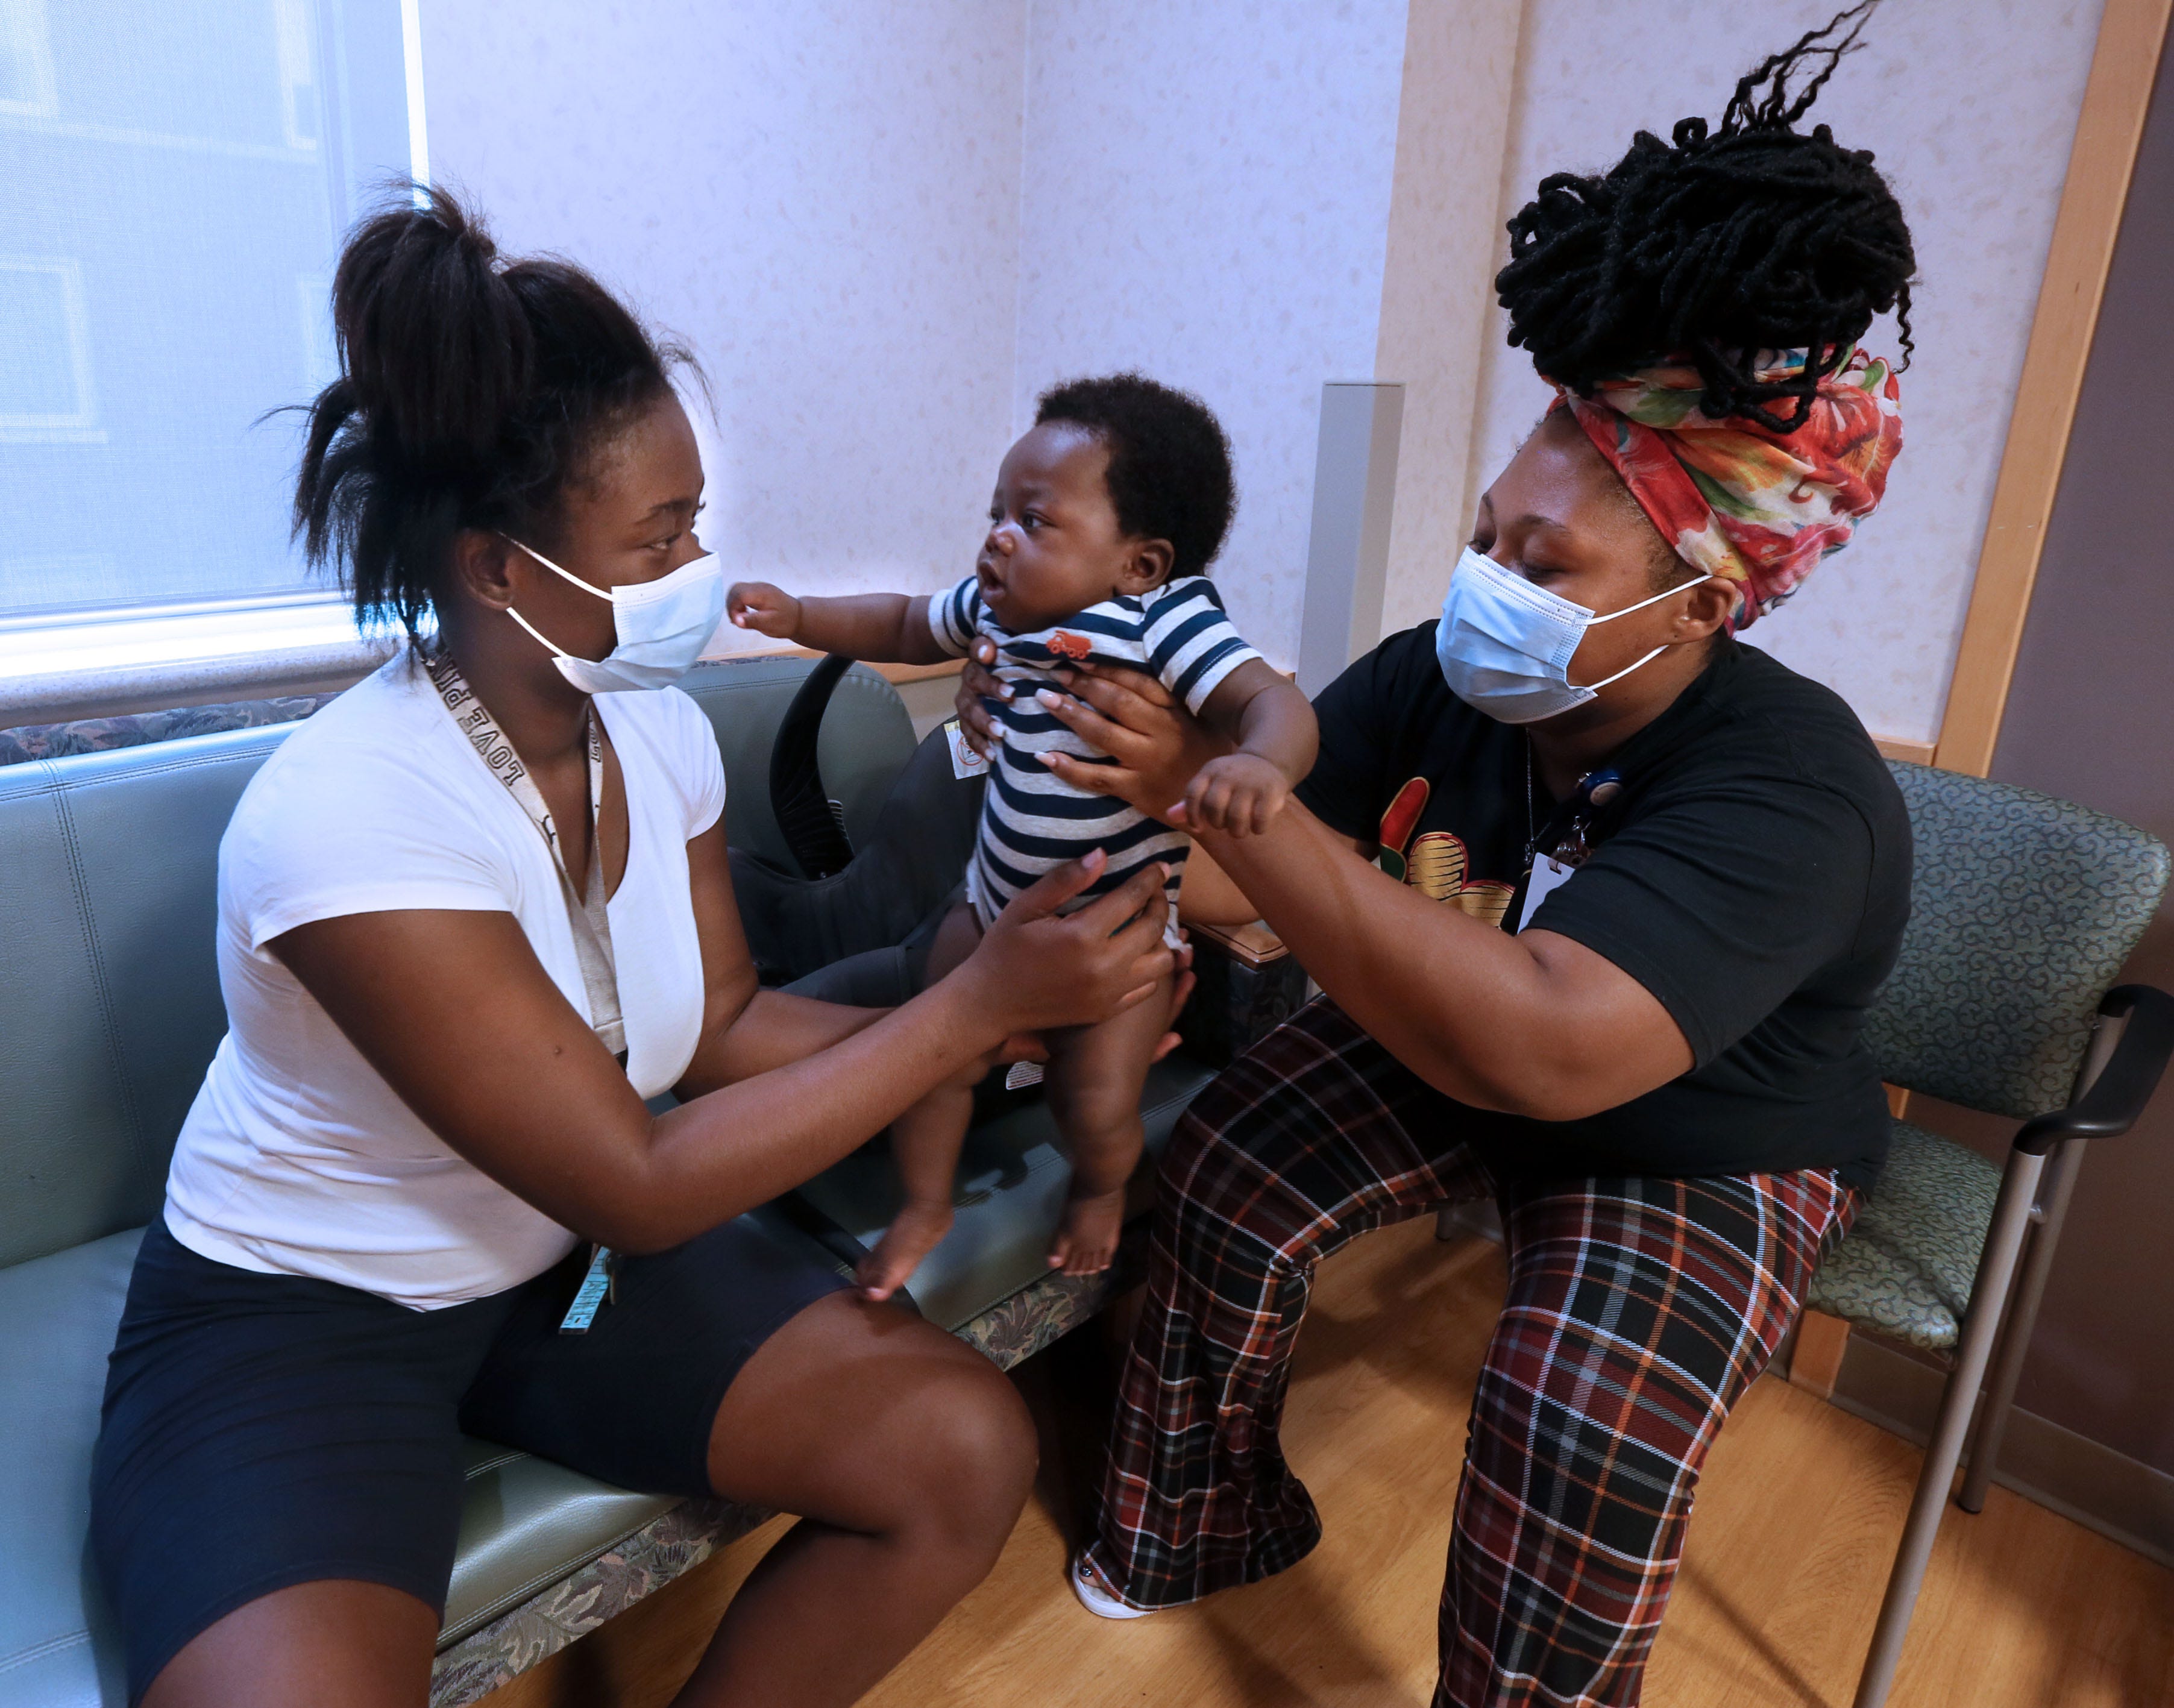 Santana Grady, right, a community health worker, hands 5-month-old Veon Jackson to his mother, Jermesha Farmer, while at a newborn checkup at Ascension SE Wisconsin Hospital - St. Joseph Campus, Milwaukee.